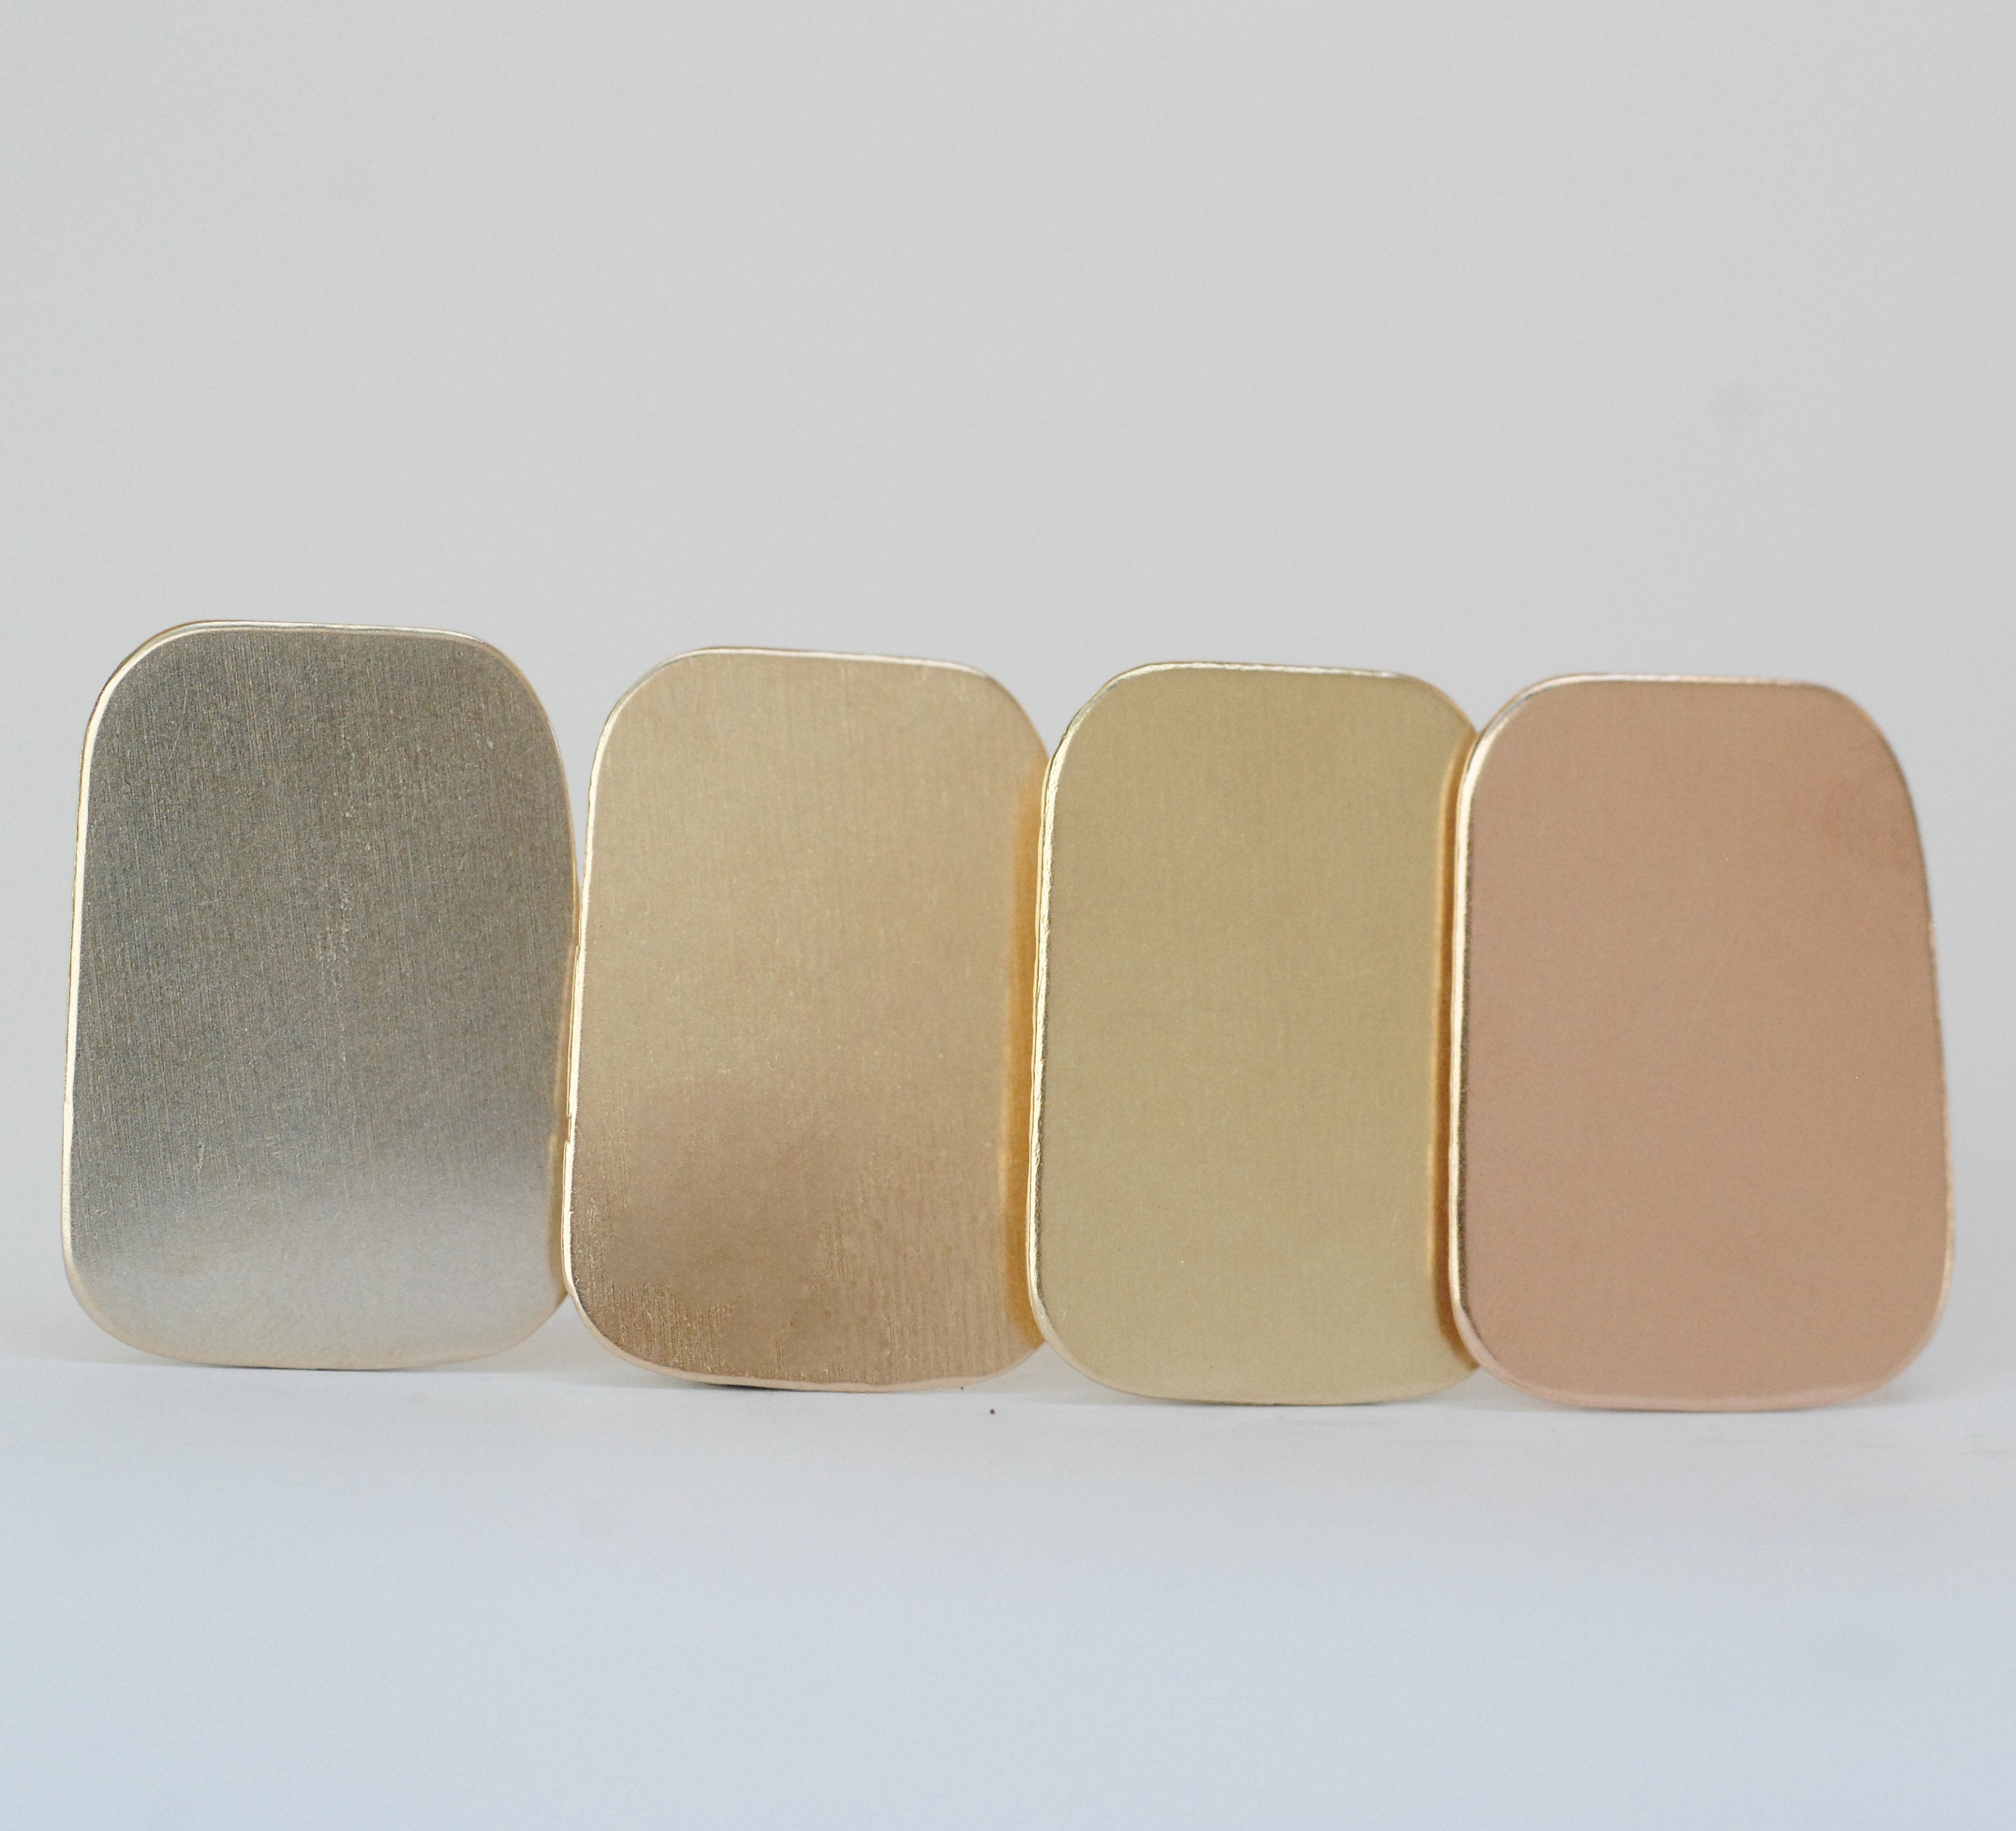 Freeform Rectangle shapes, organic metal blanks for making jewelry 20g 22g 24g copper, brass, bronze, nickel silver